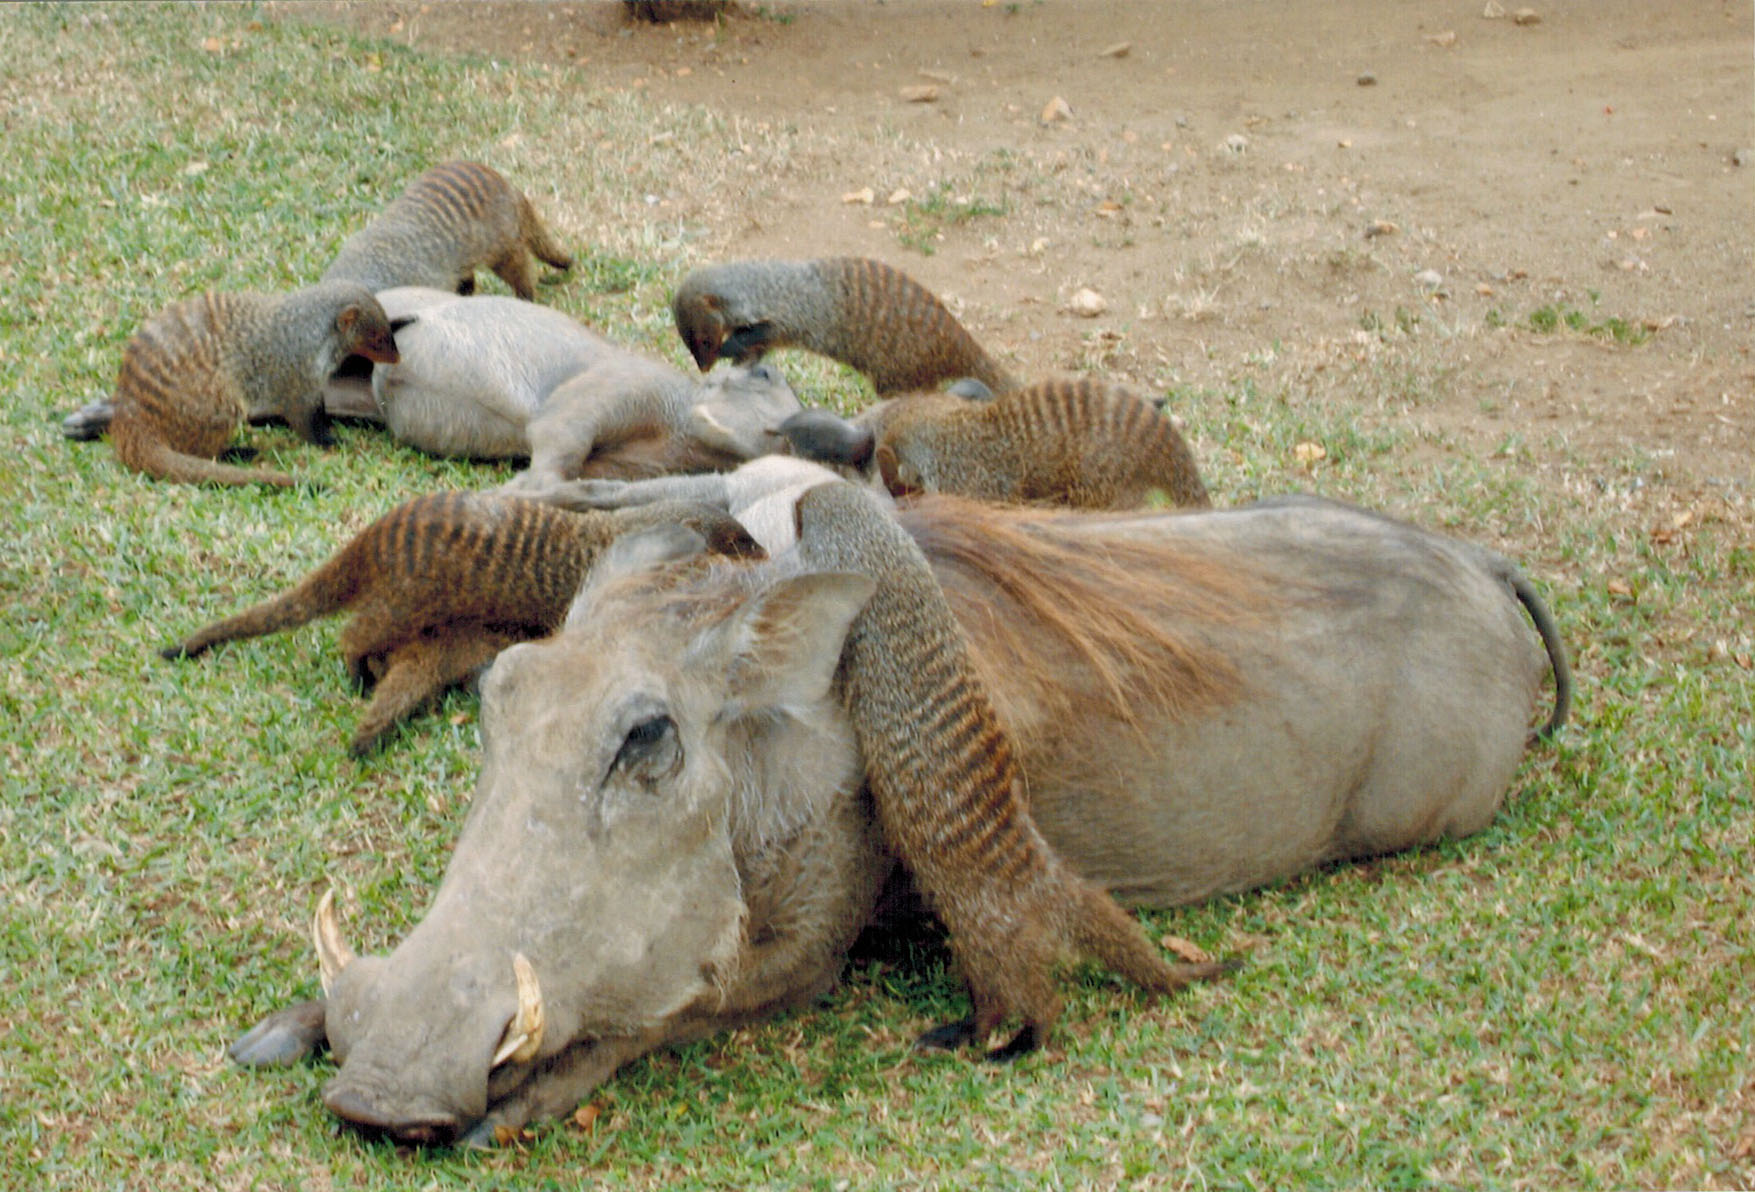 Warthog groomed by mongoose